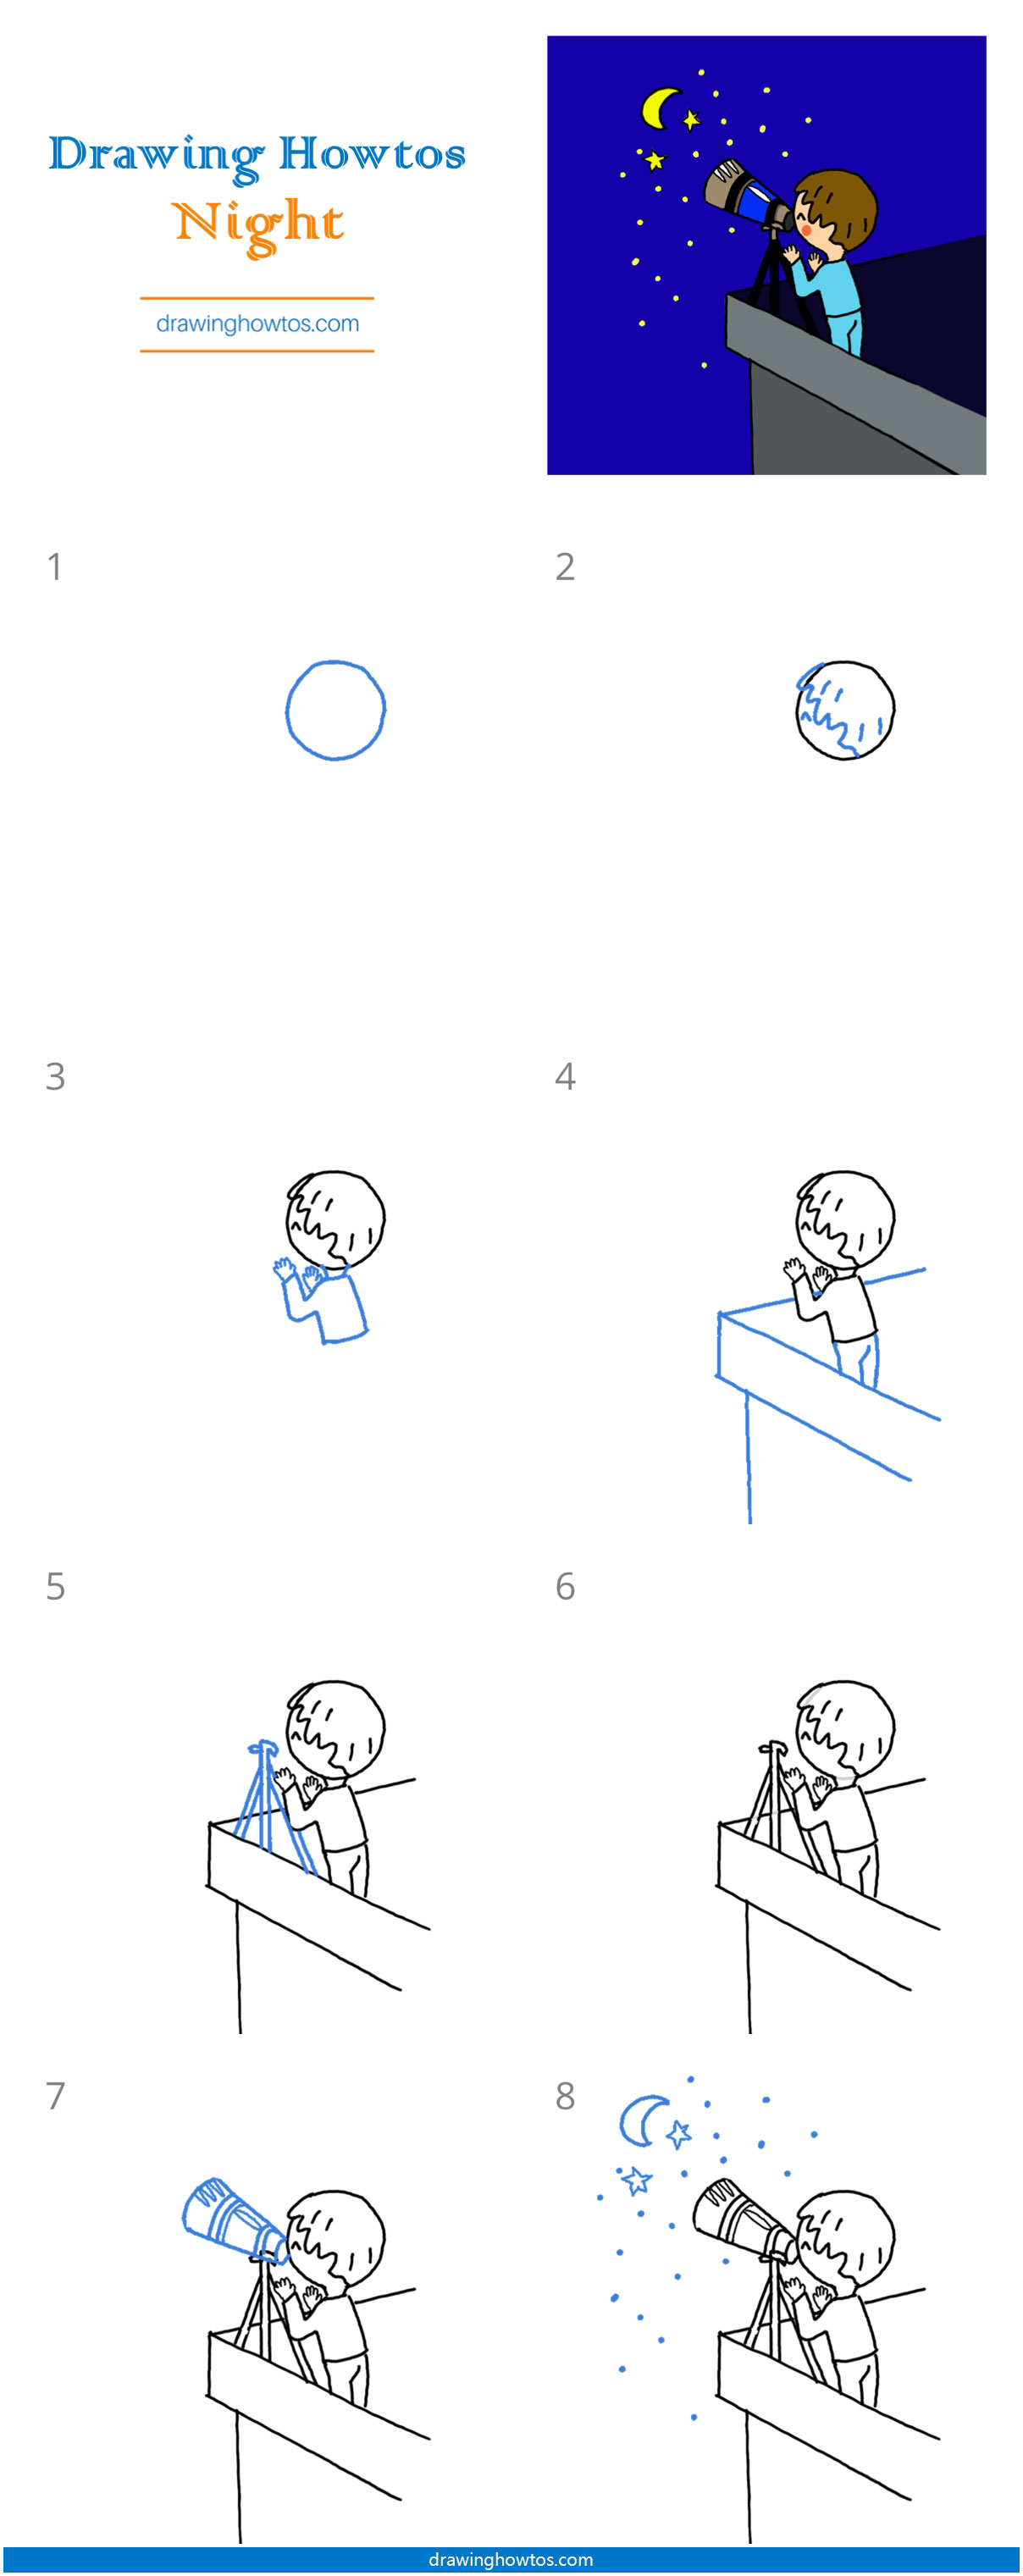 How to Draw a Boy Looking at Night Sky with Telescope Step by Step